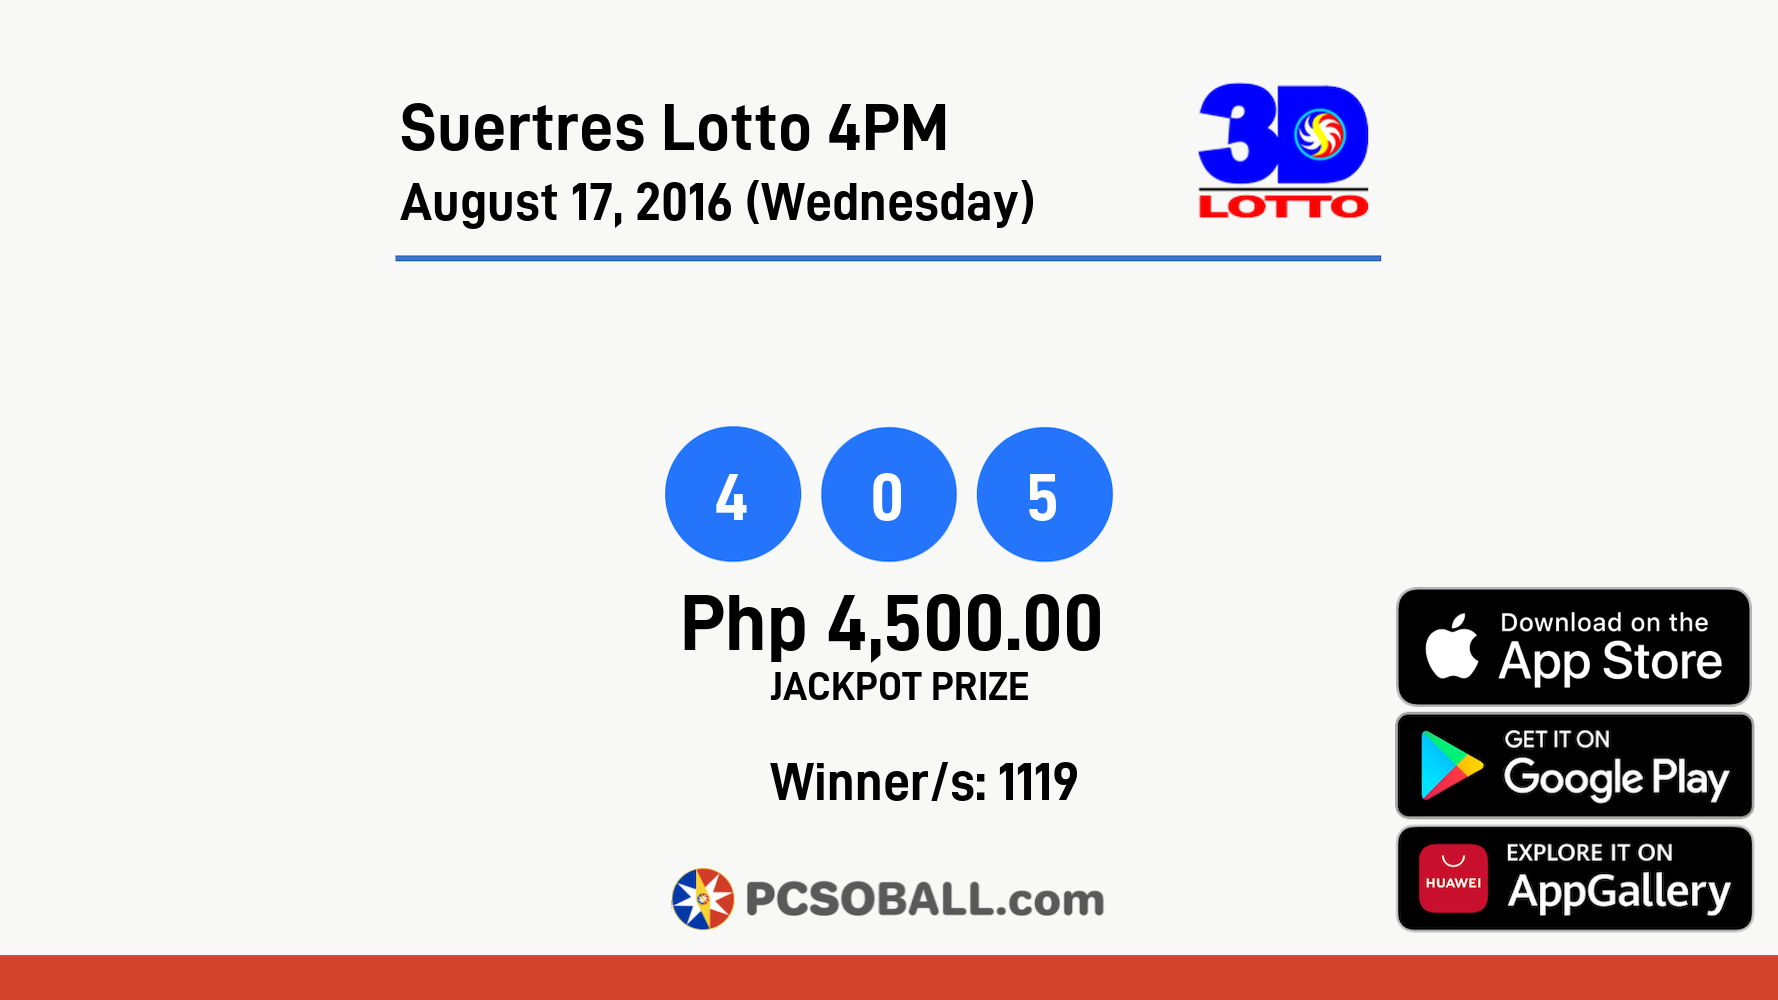 Suertres Lotto 4PM August 17, 2016 (Wednesday) Result